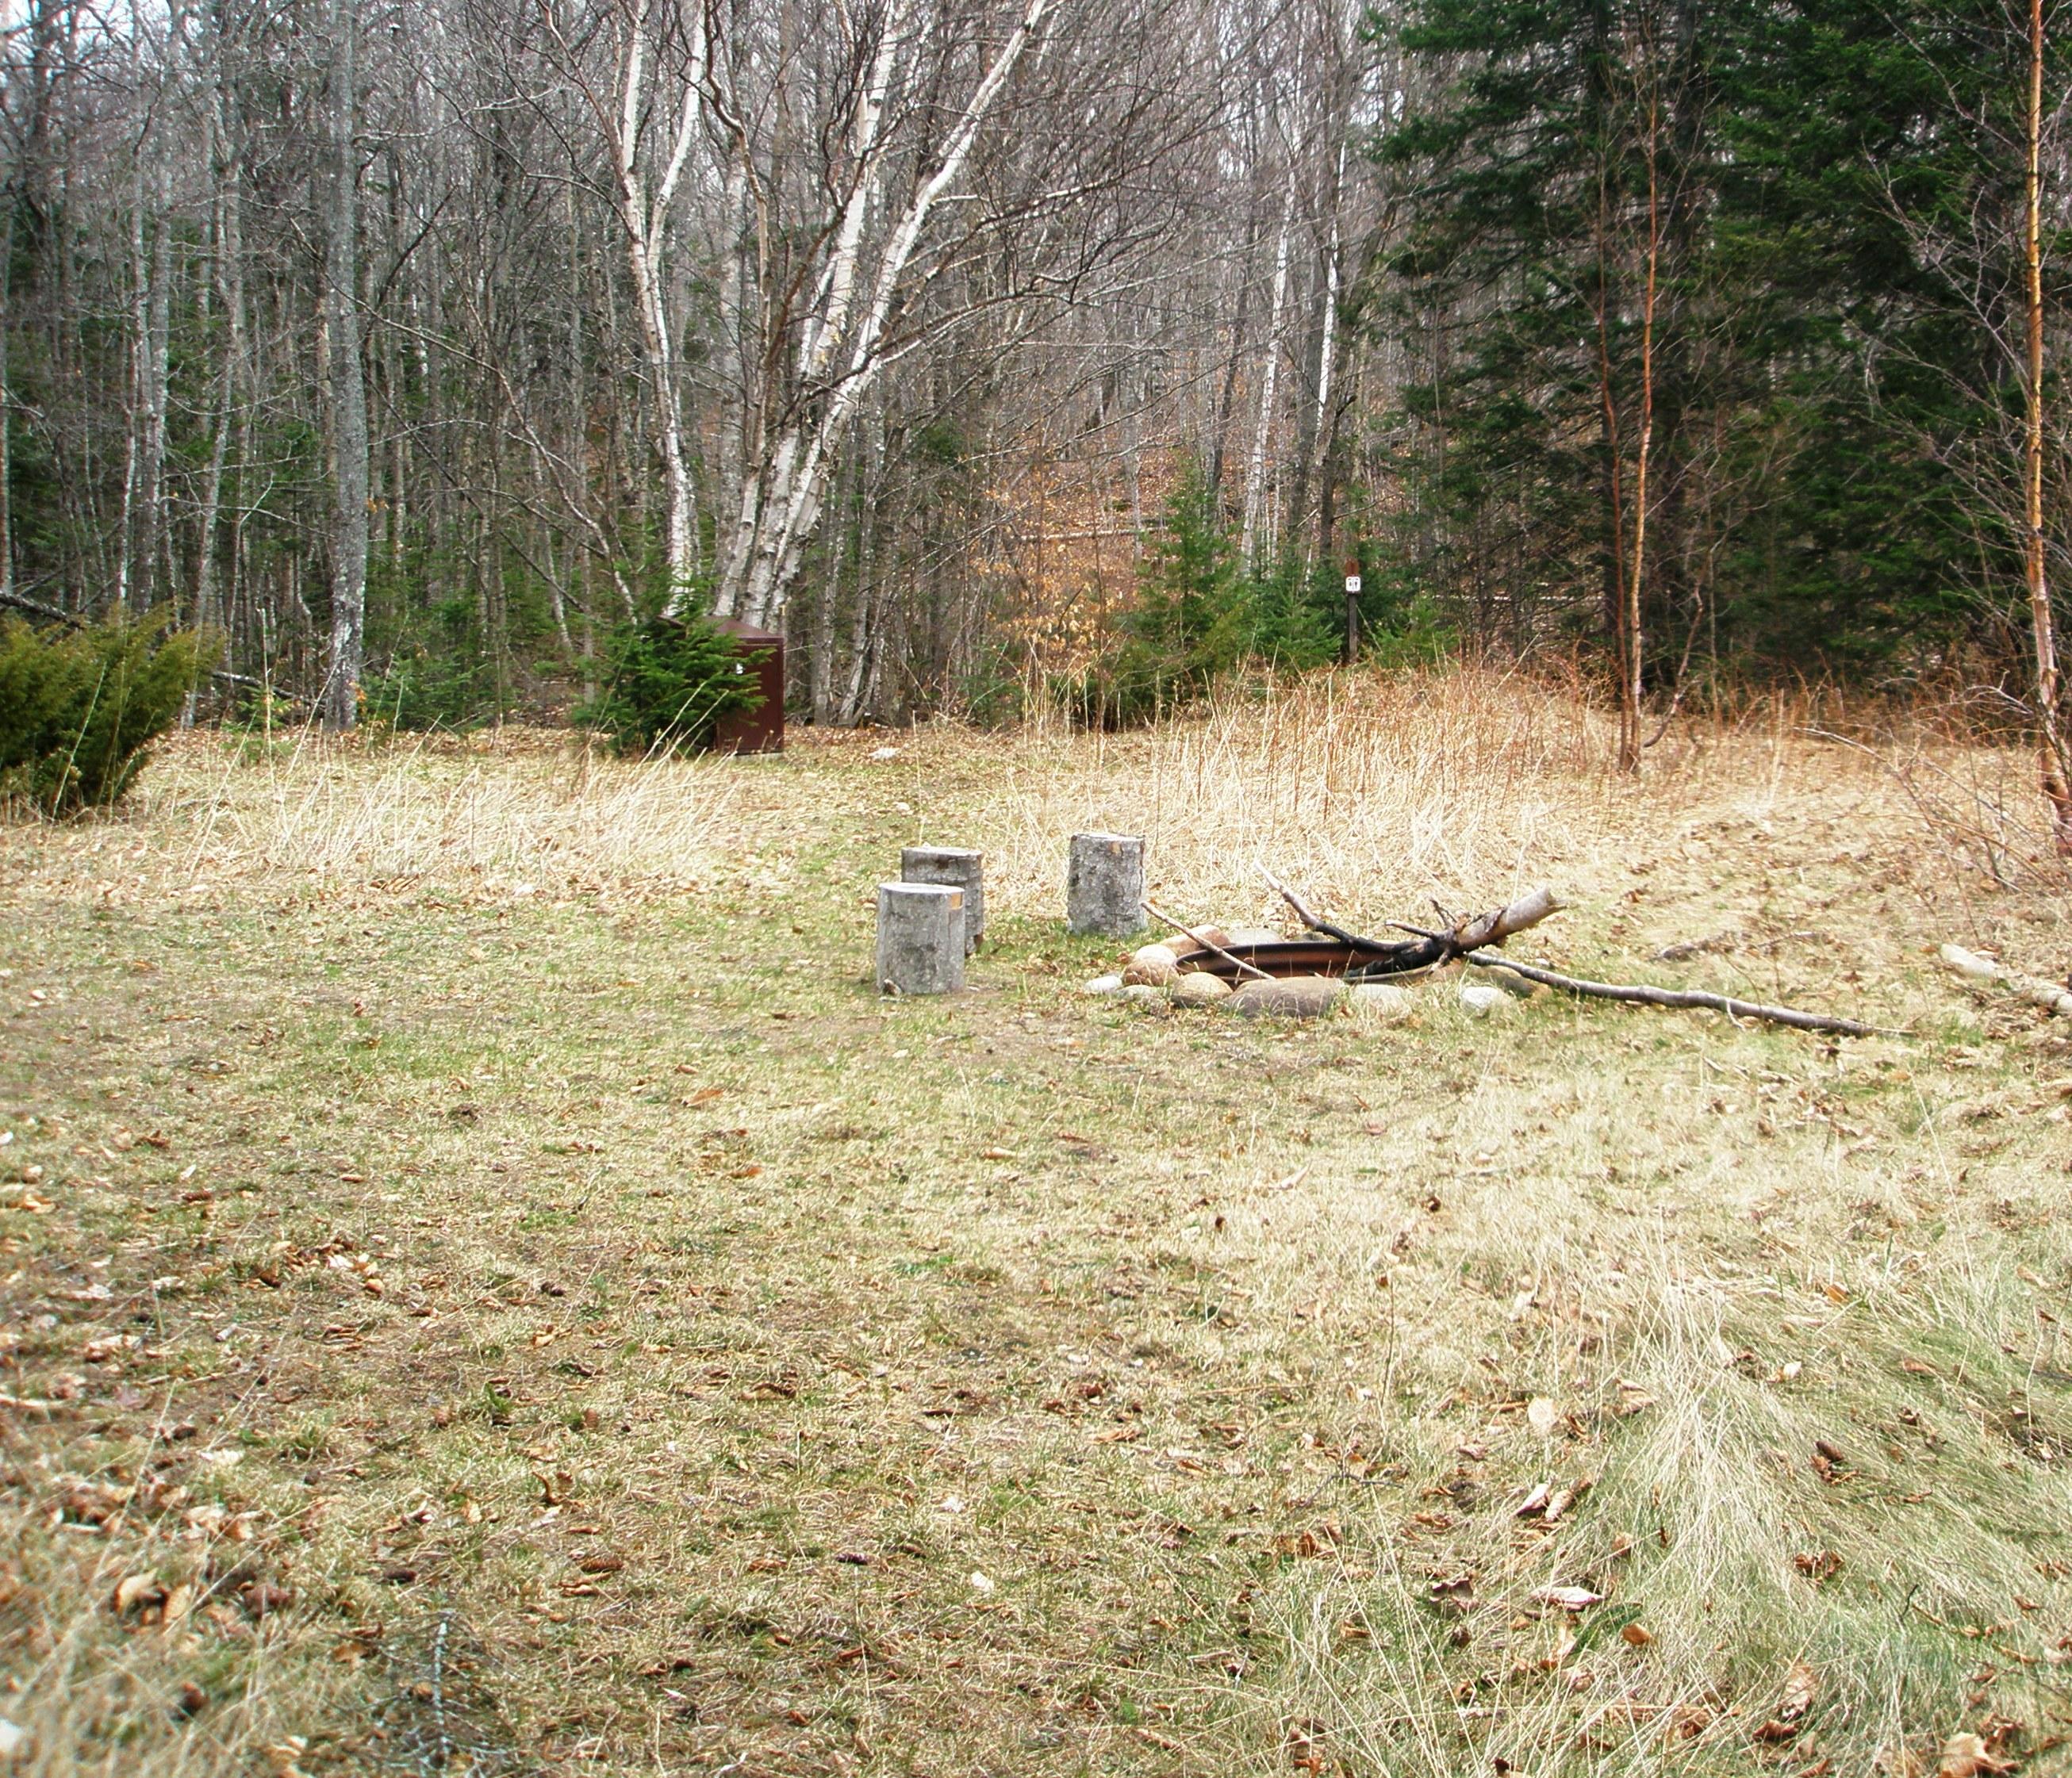 Metal fire ring and tree stump seats in a grassy field